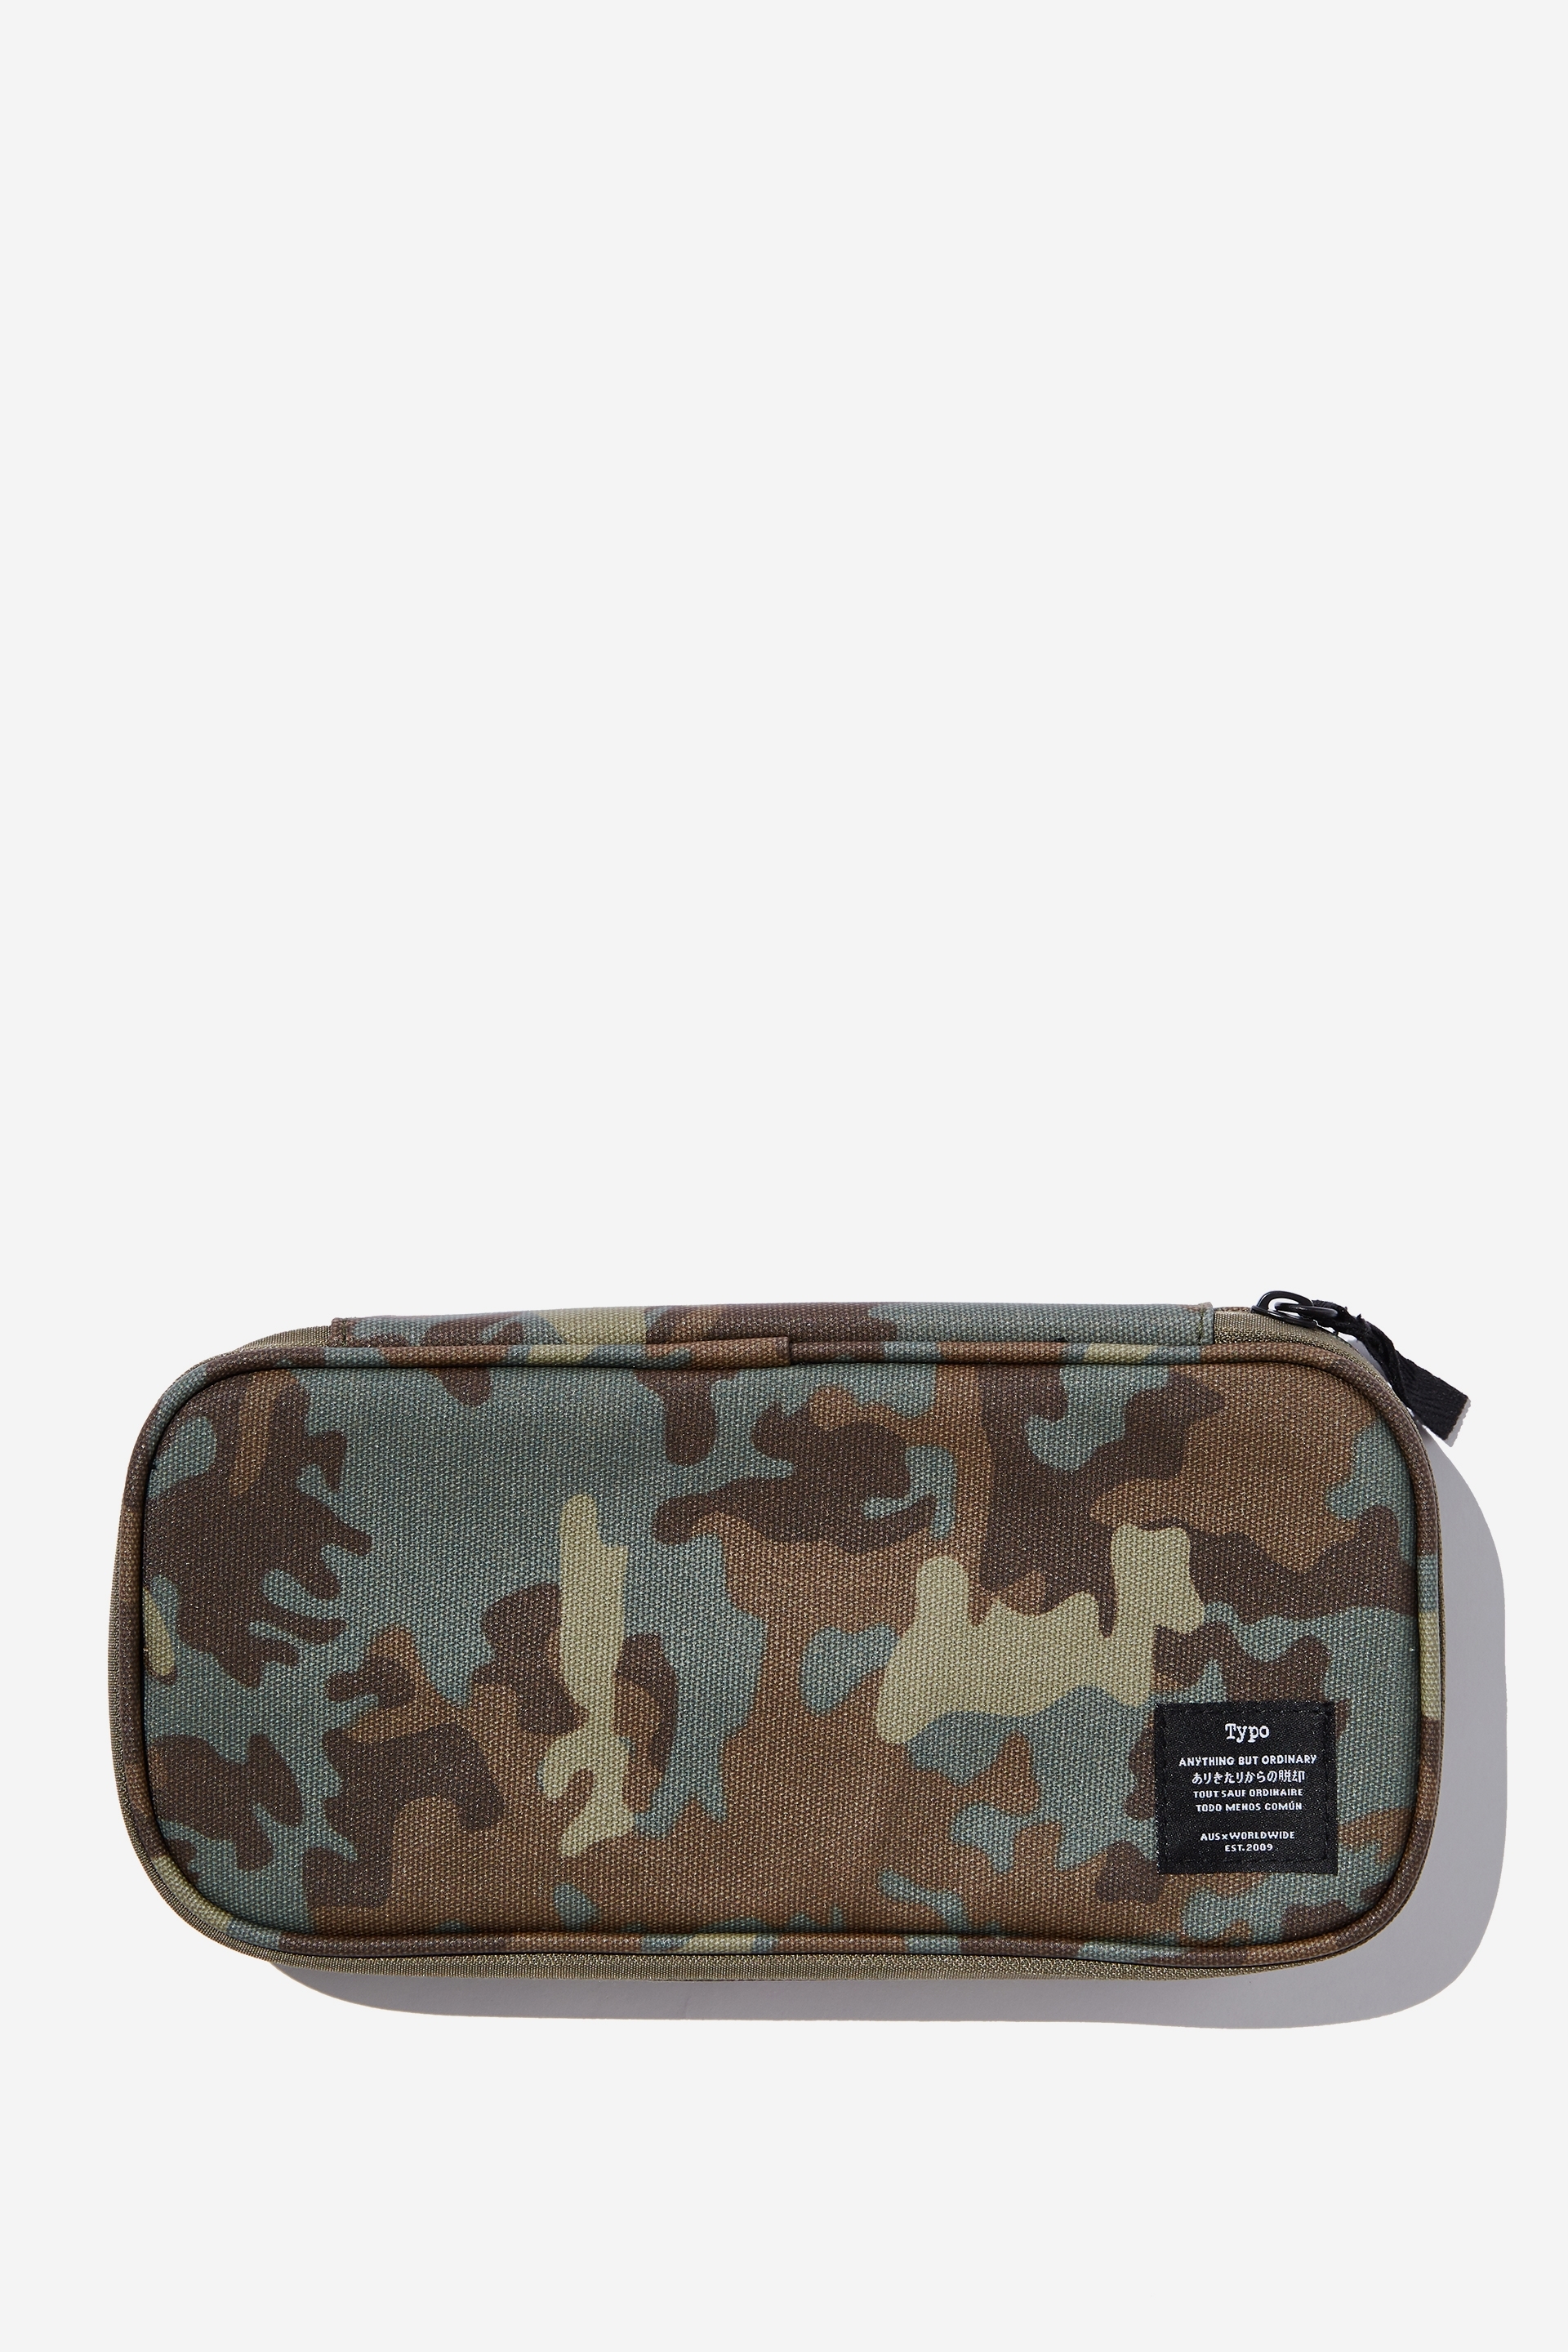 Typo - Switch It Up Gaming Case - Camo